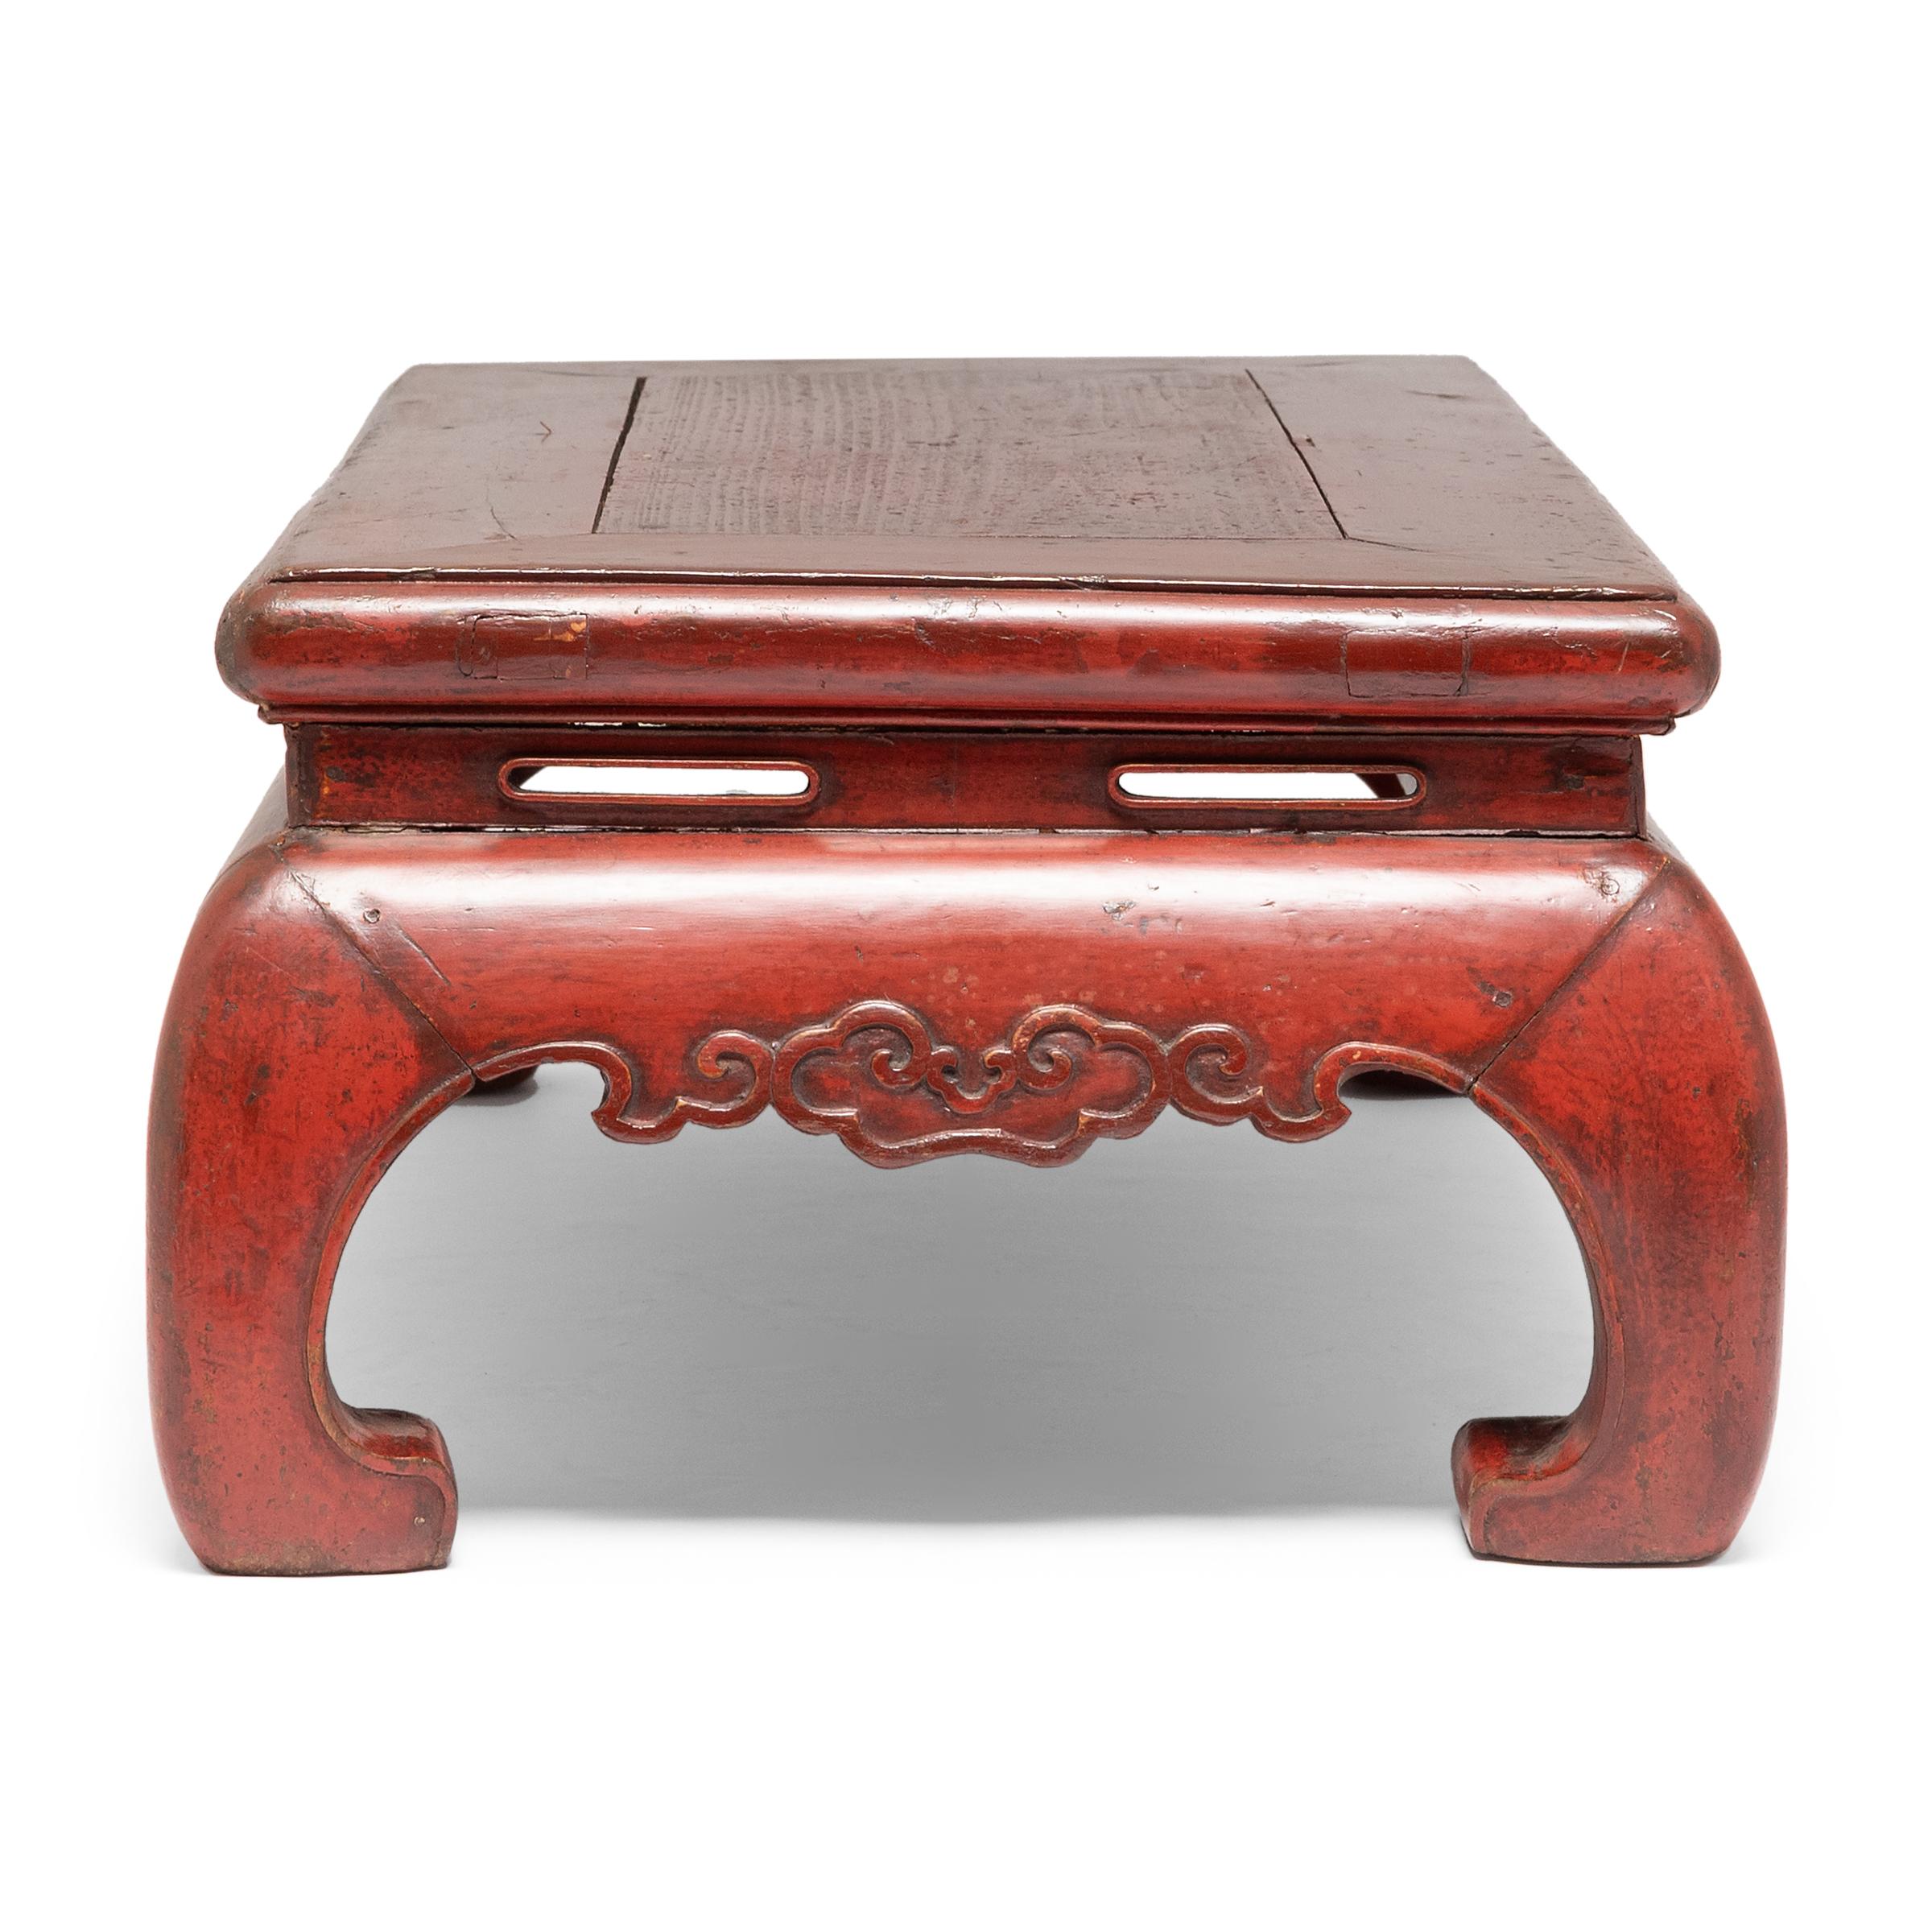 Qing Chinese Red Lacquer Kang Table, c. 1900